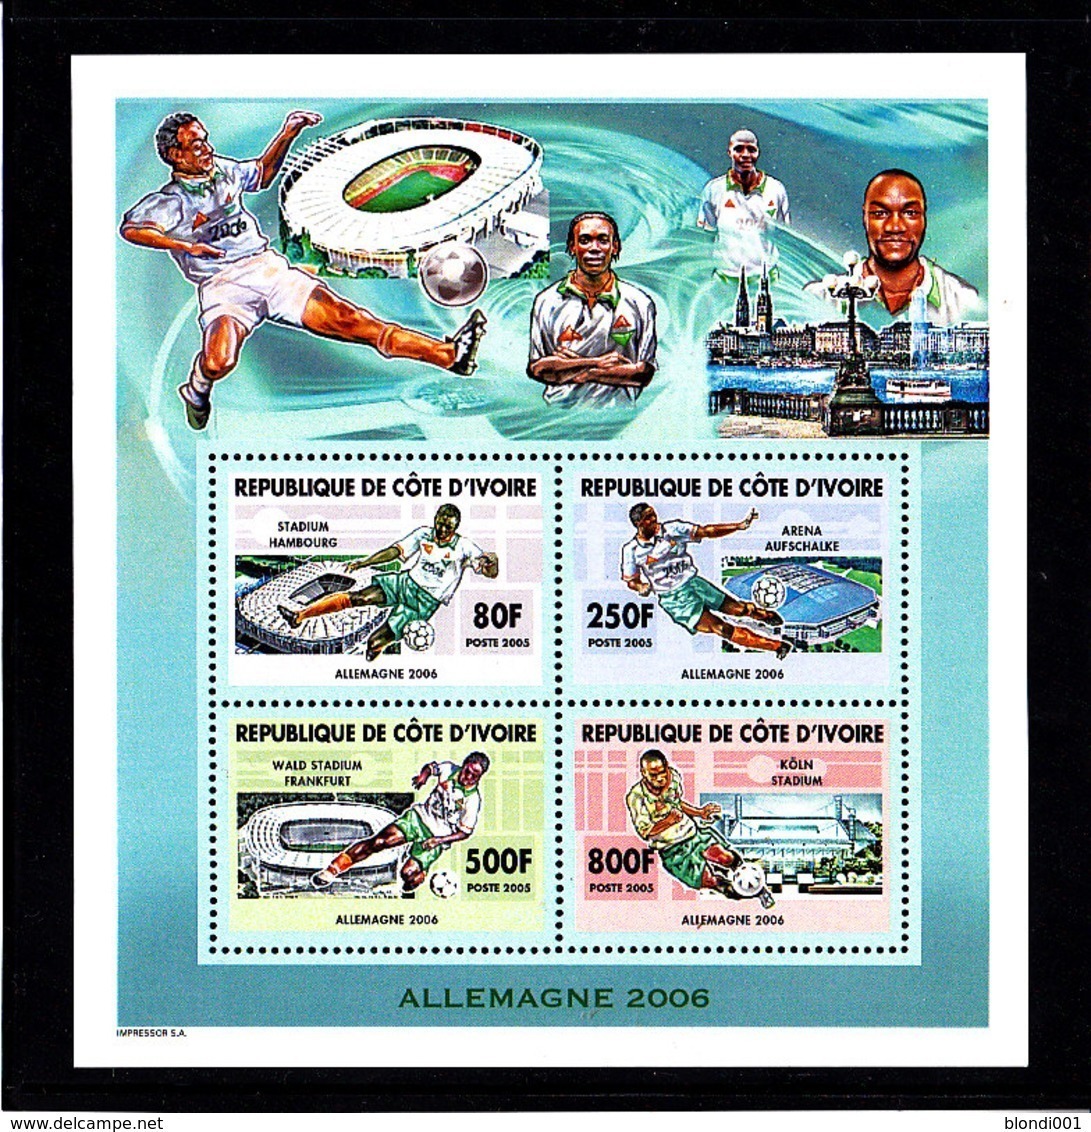 Soccer World Cup 2006 - Football - COTE D'IVOIRE - S/S MNH - 2006 – Germany